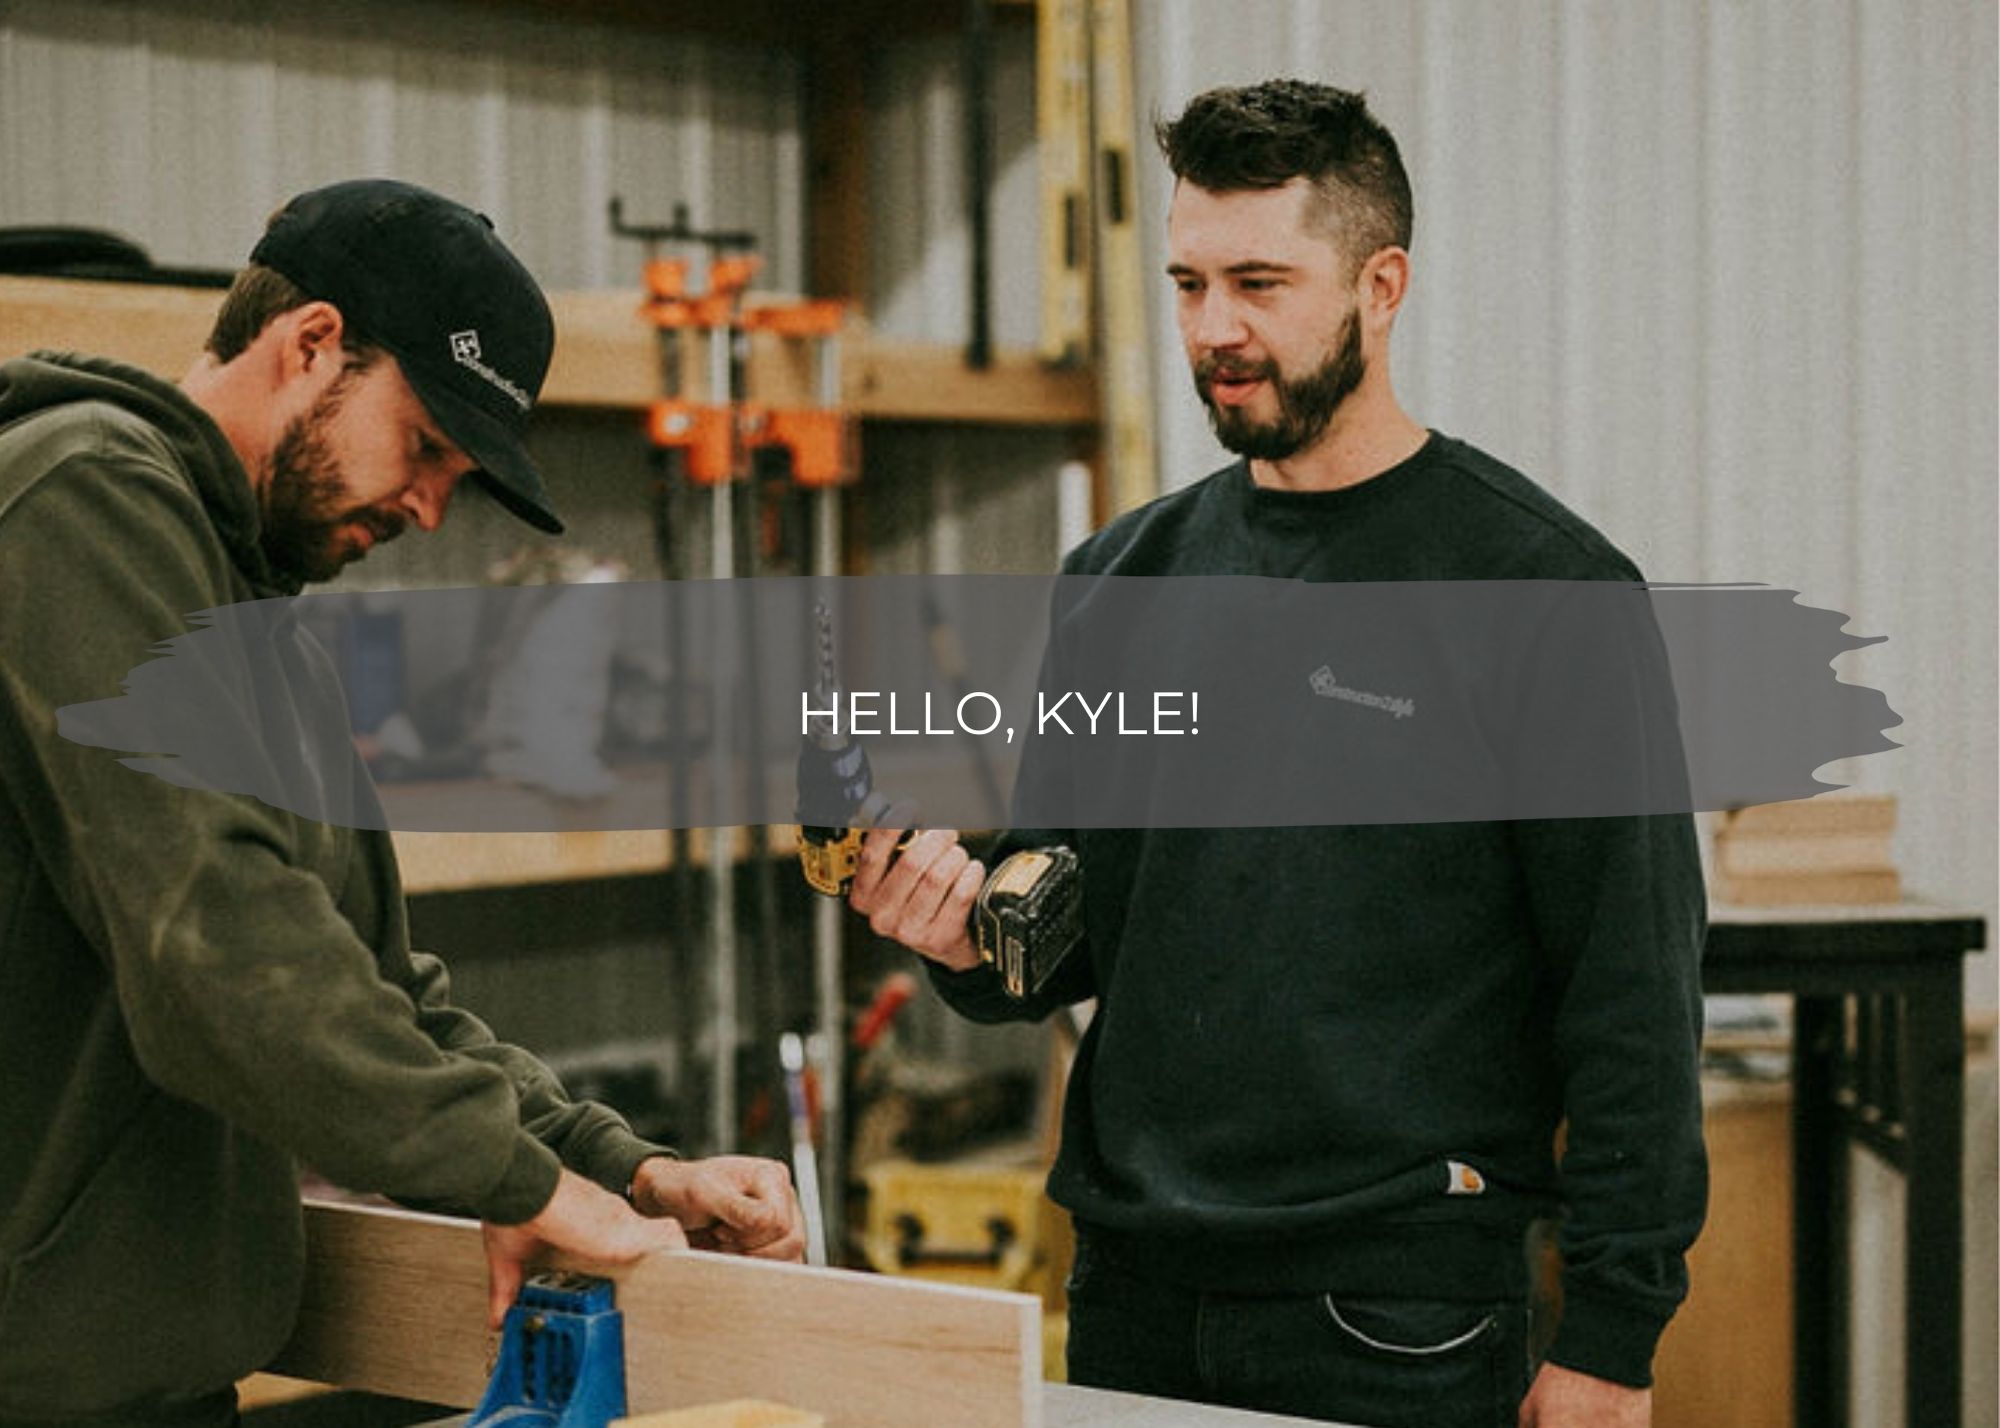 Meet Kyle Storley, our Newest Project Manager